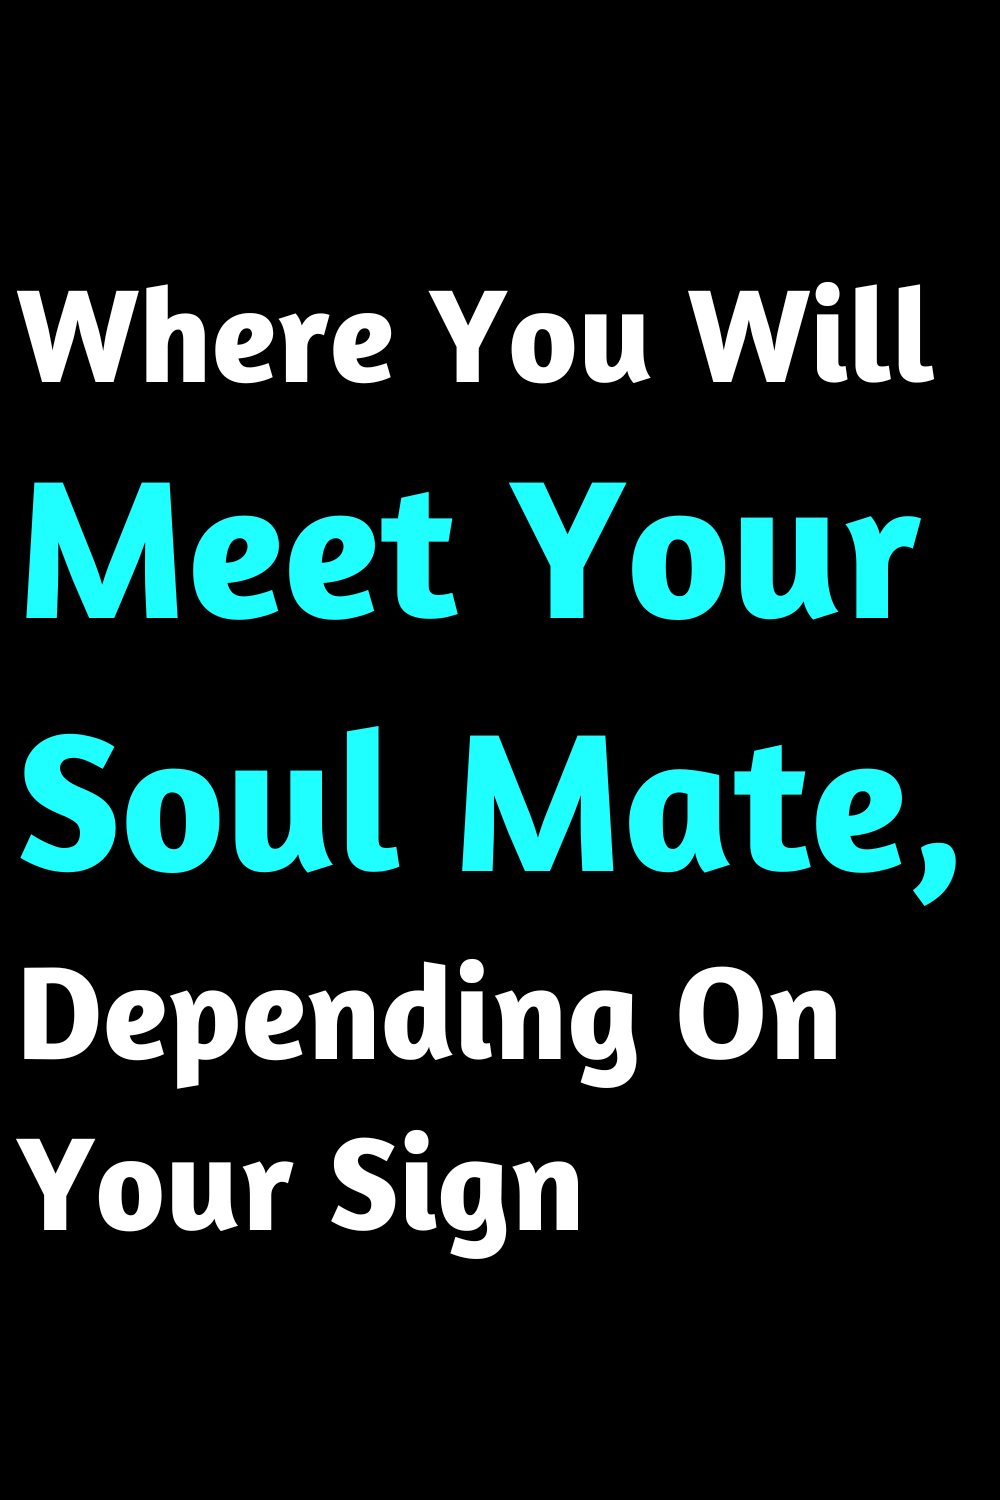 Where You Will Meet Your Soul Mate, Depending On Your Sign